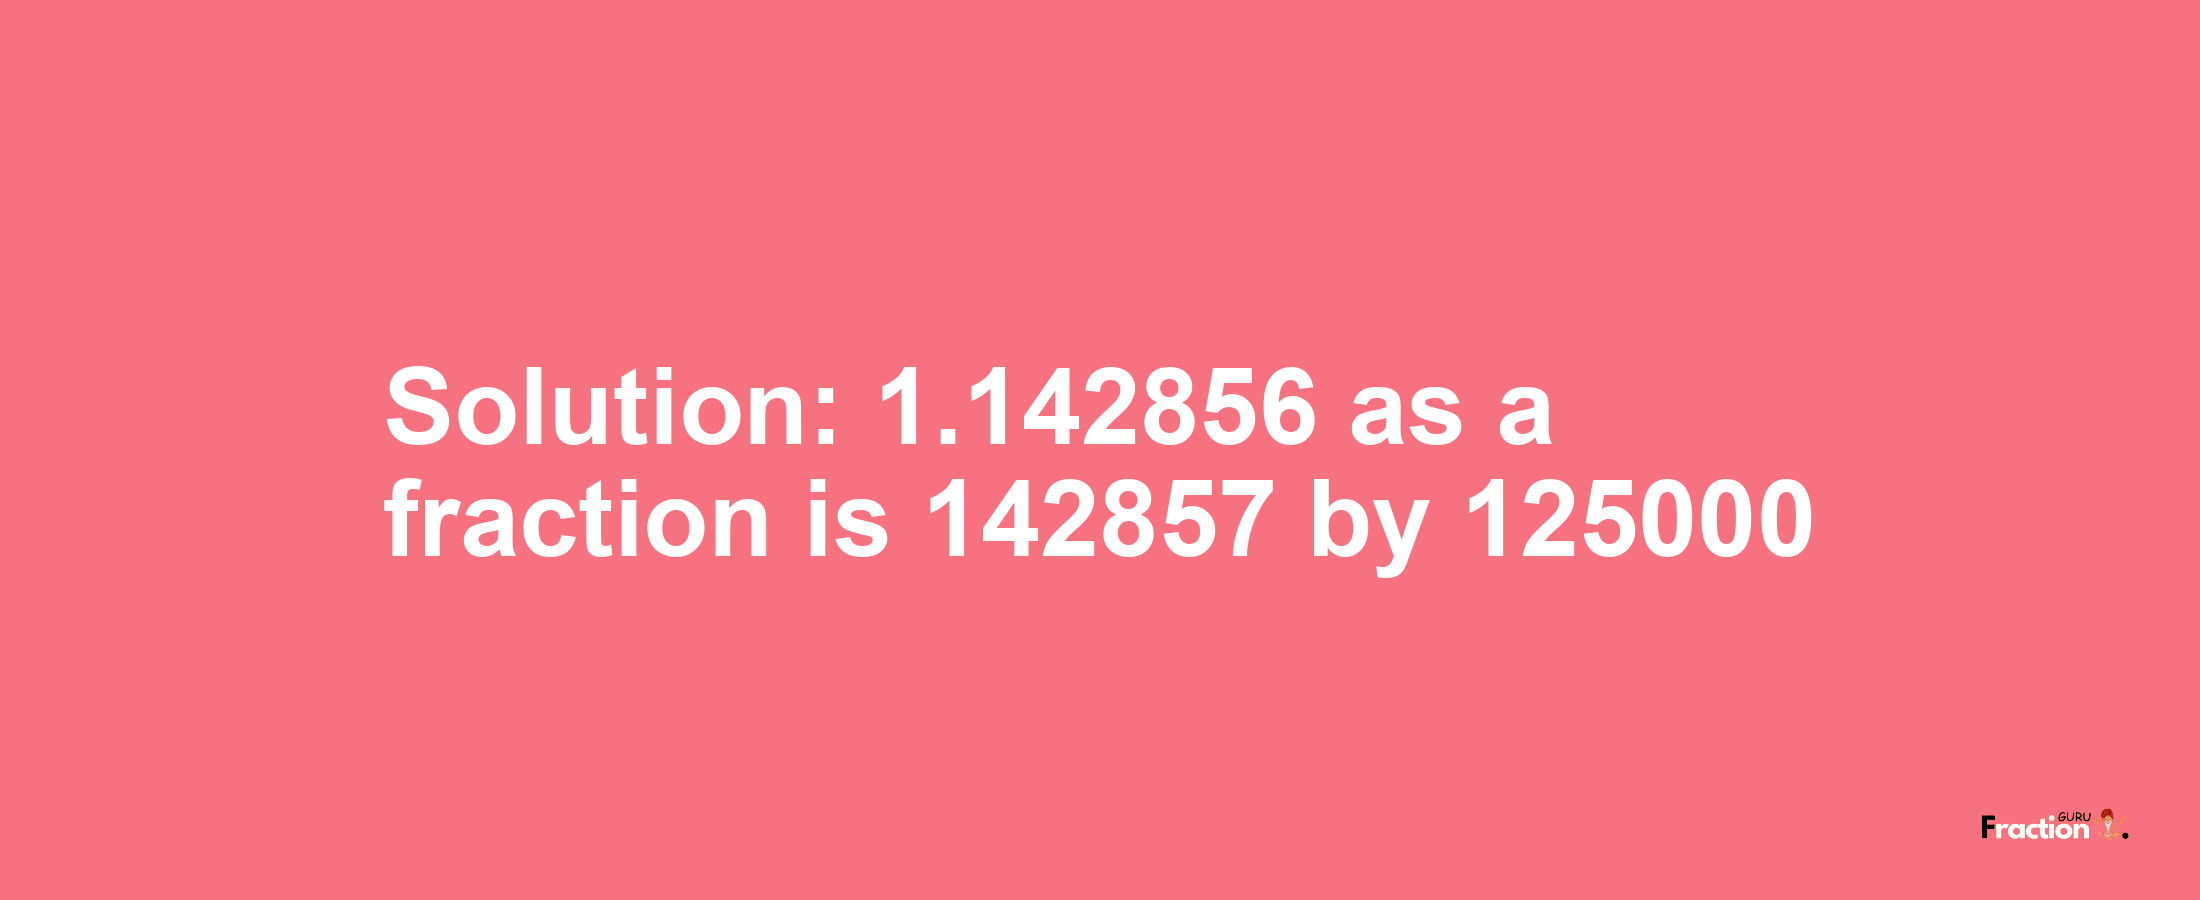 Solution:1.142856 as a fraction is 142857/125000